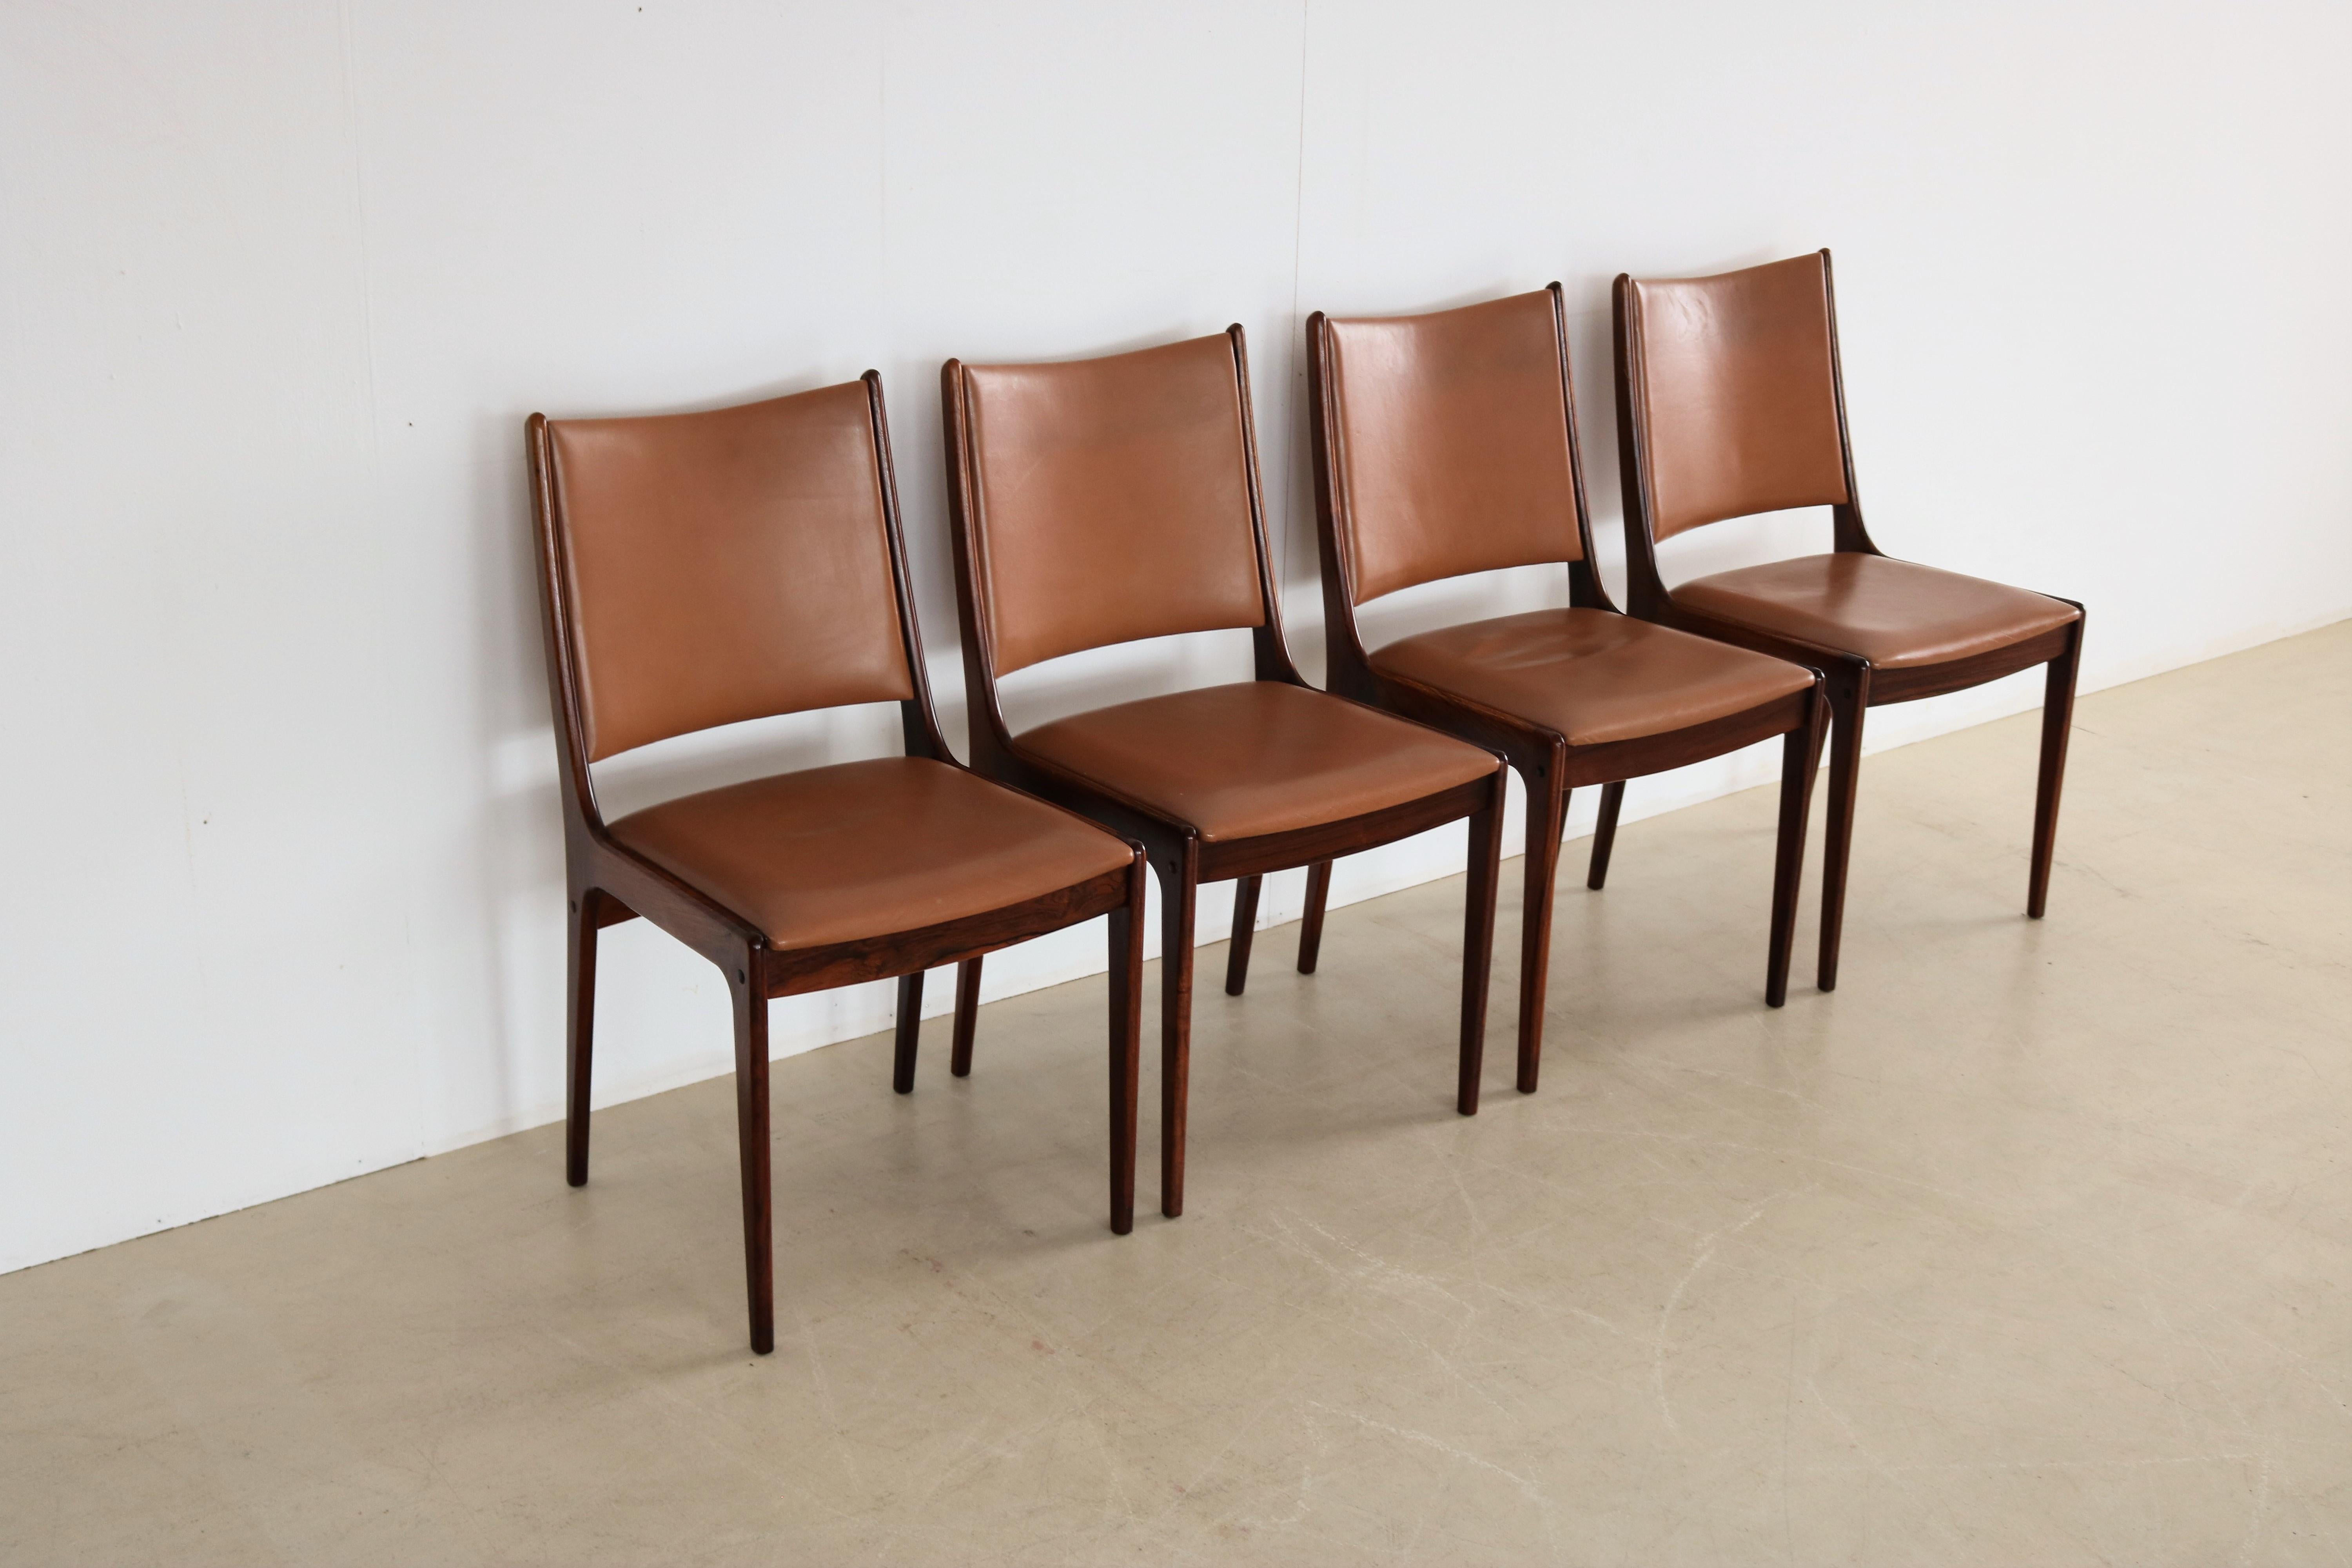 Mid-20th Century Vintage Dining Room Chairs Chairs 1960s Danish